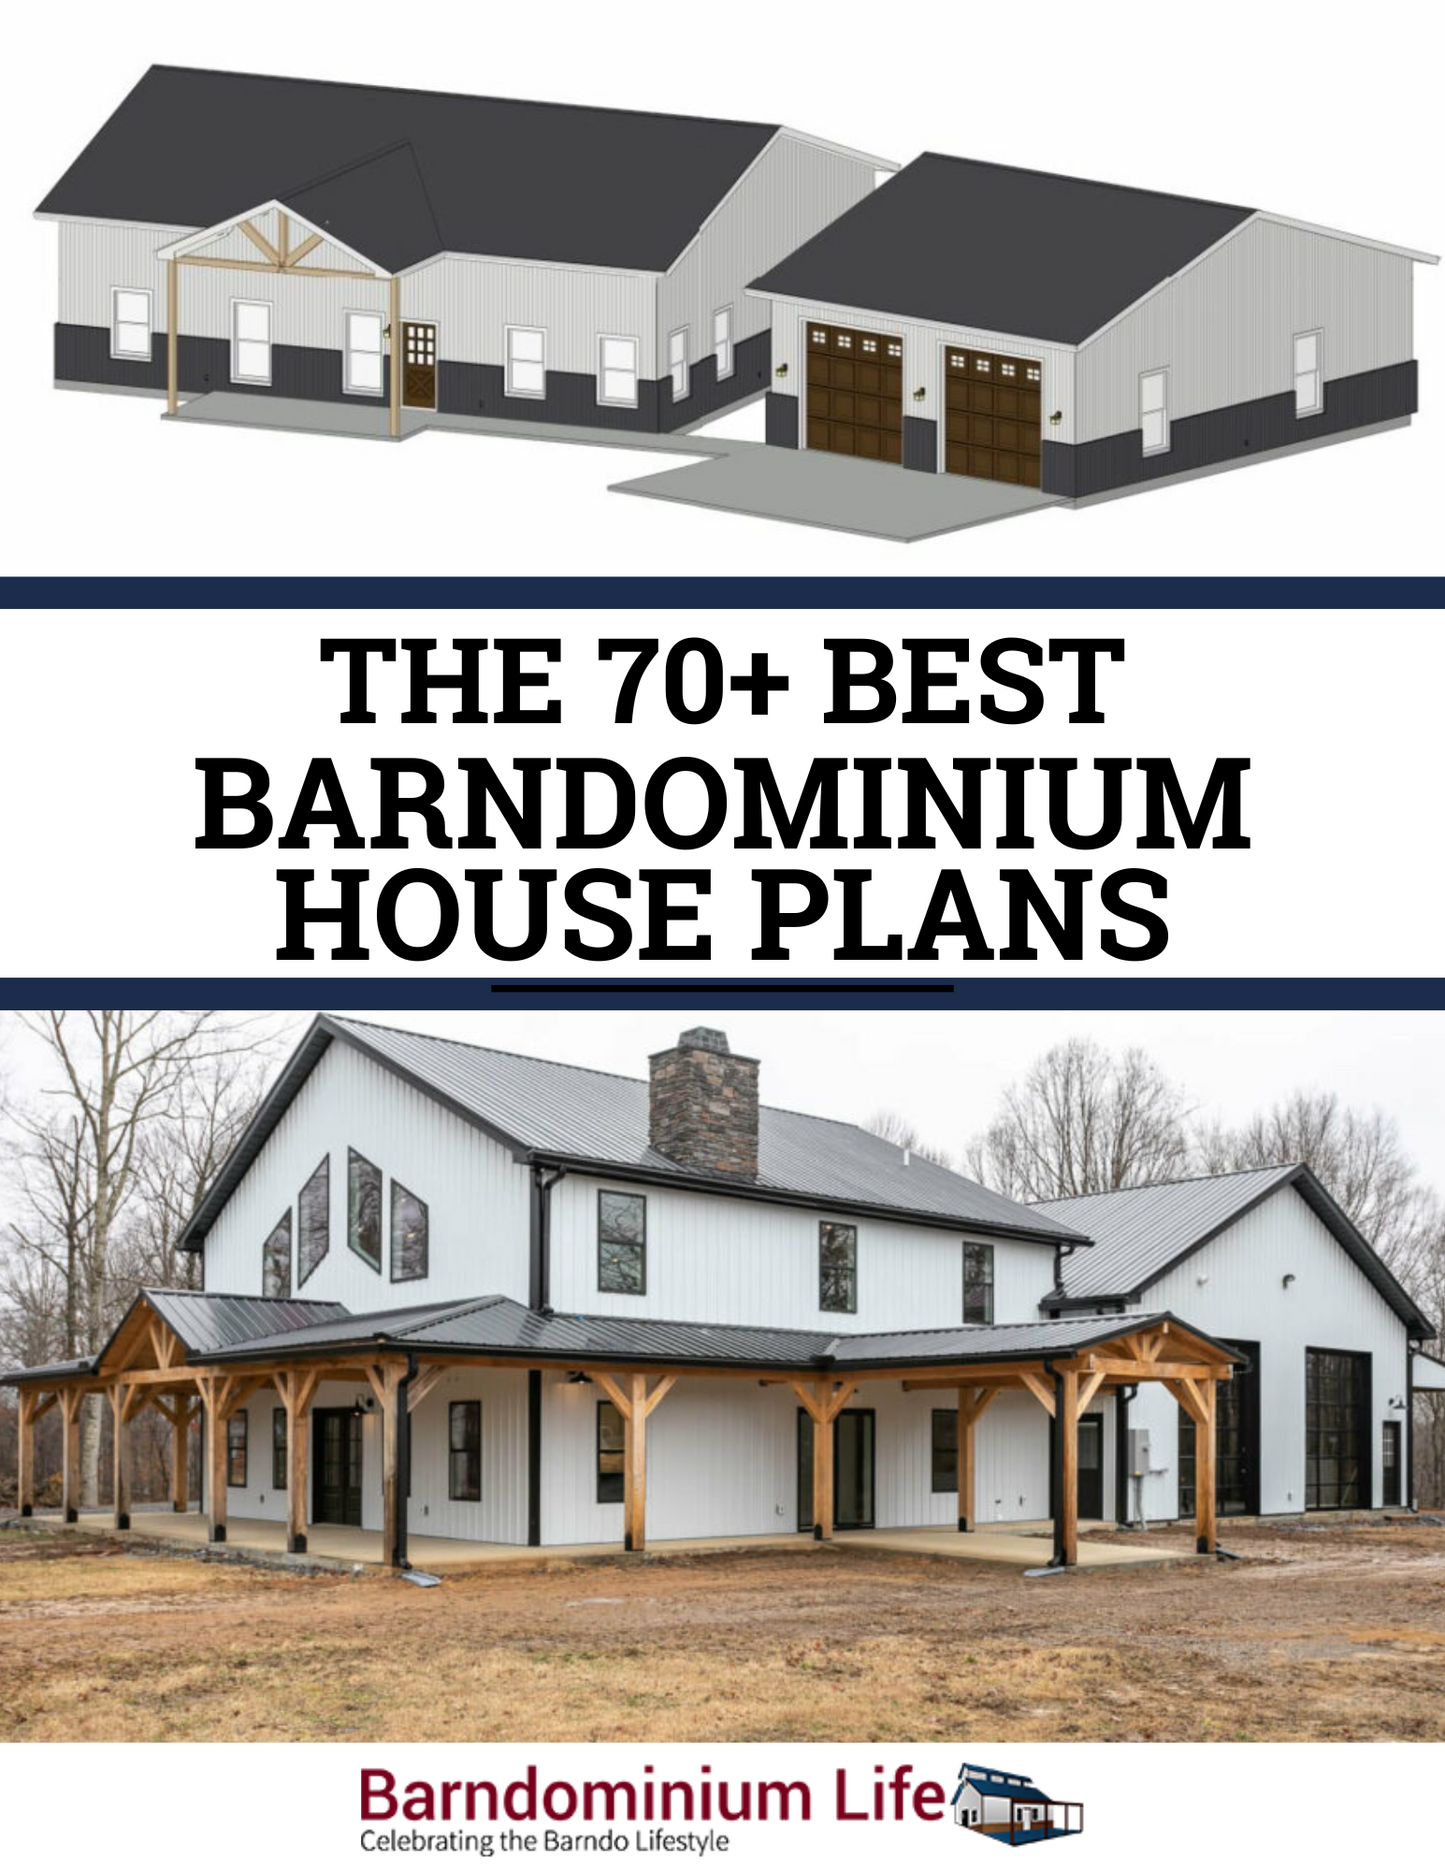 The House Plans